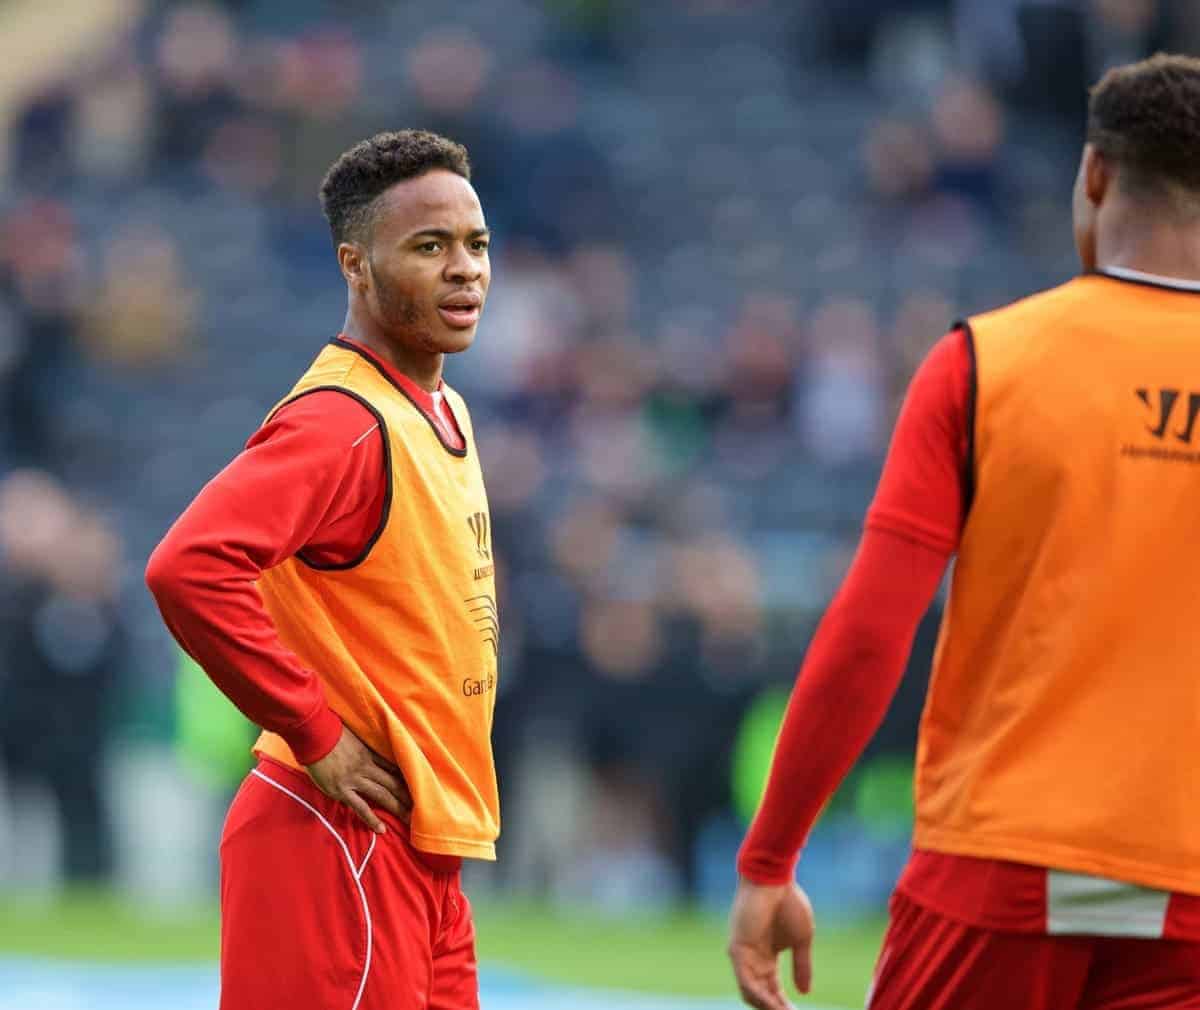 KINGSTON-UPON-HULL, ENGLAND - Tuesday, April 28, 2015: Liverpool's Raheem Sterling before the game against Hull City in the Premier League match at the KC Stadium. (Pic by Gareth Jones/Propaganda)